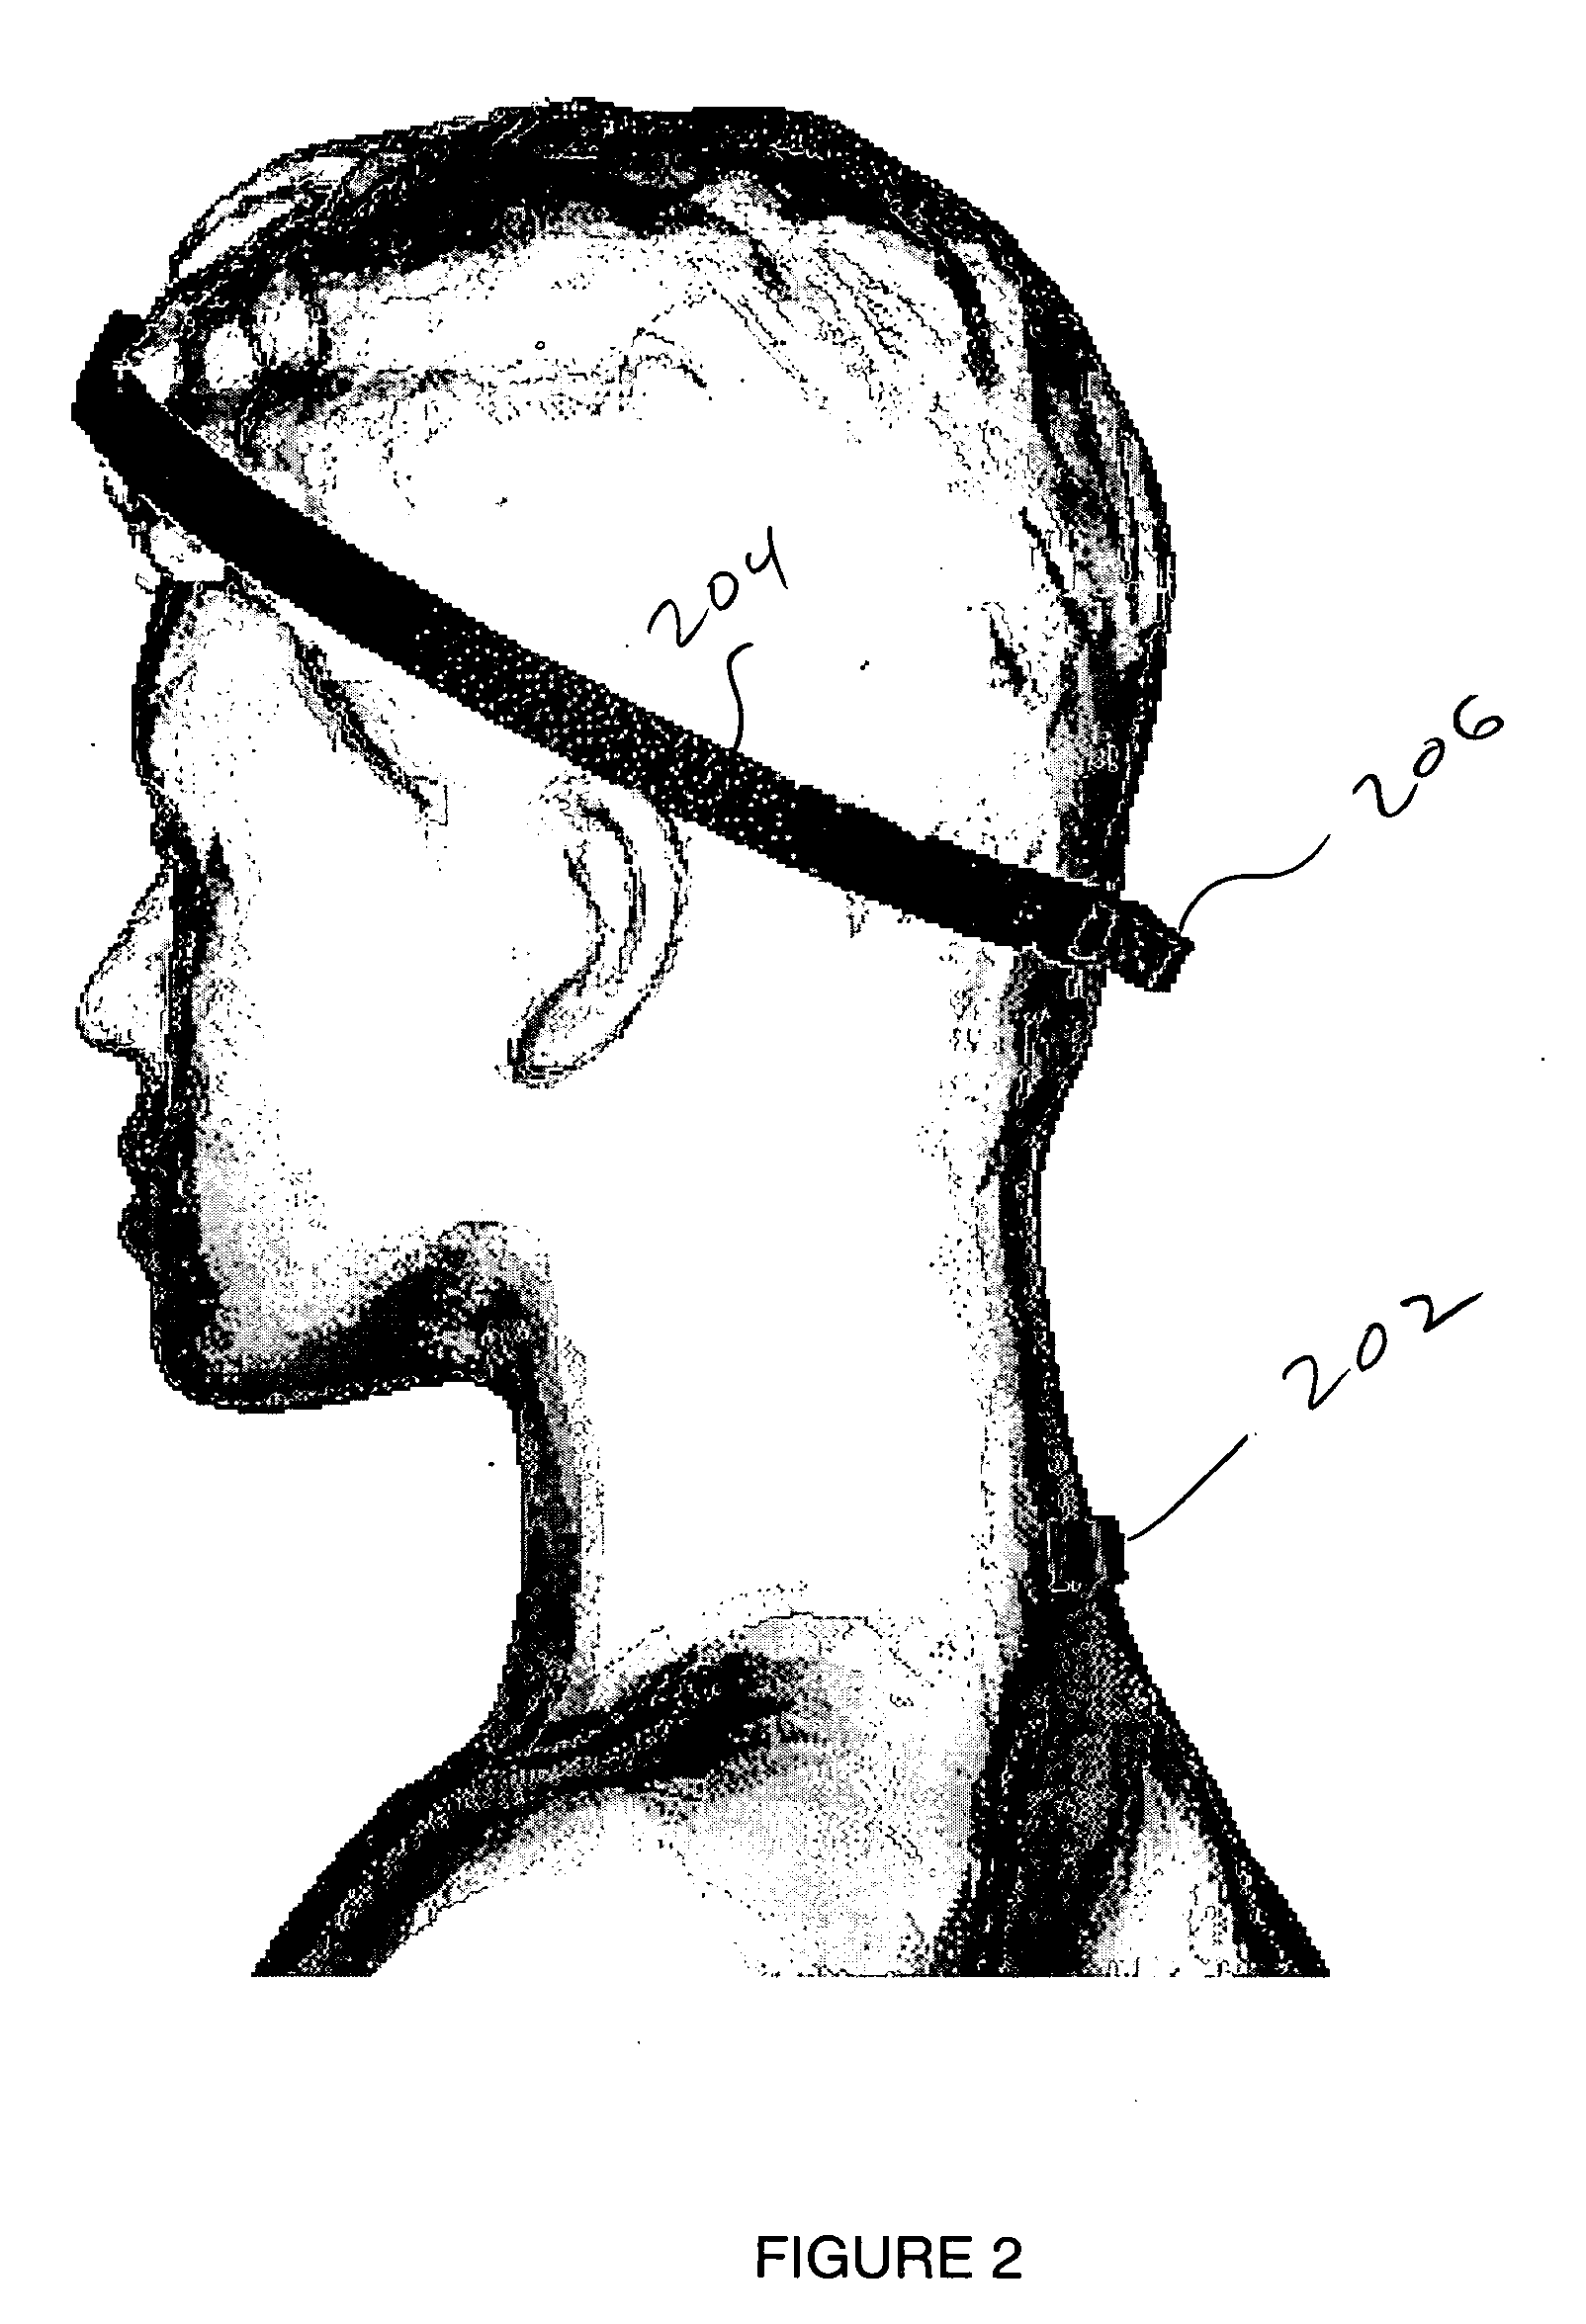 Head-mounted pointing and control device